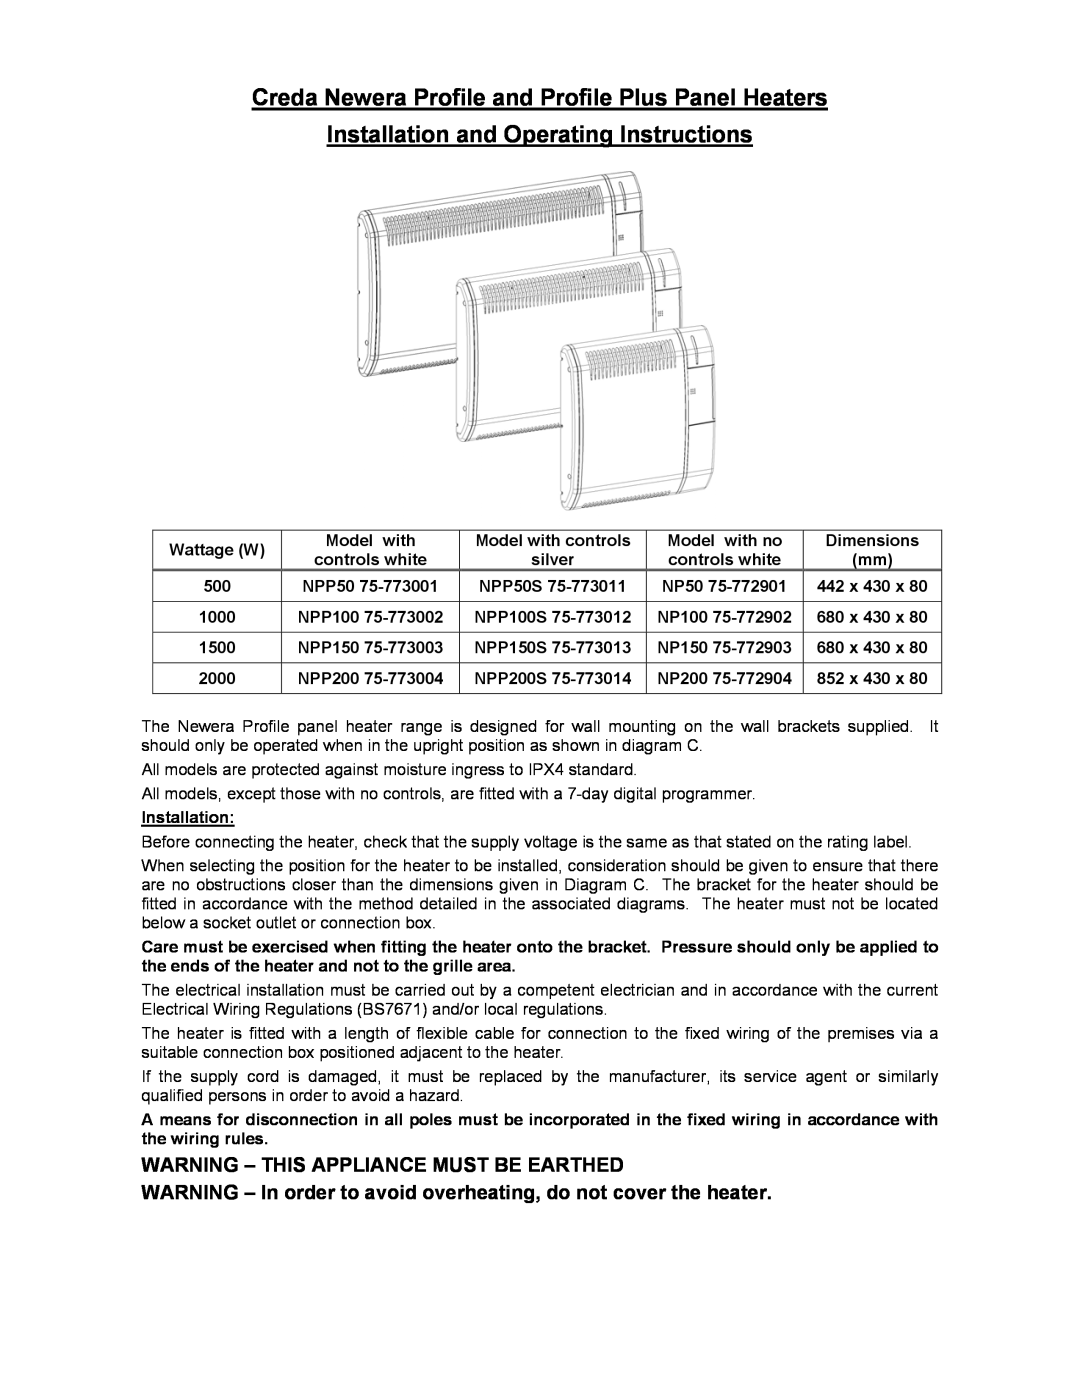 Creda NPP200 75-773004 dimensions Installation and Operating Instructions, Warning - This Appliance Must Be Earthed 